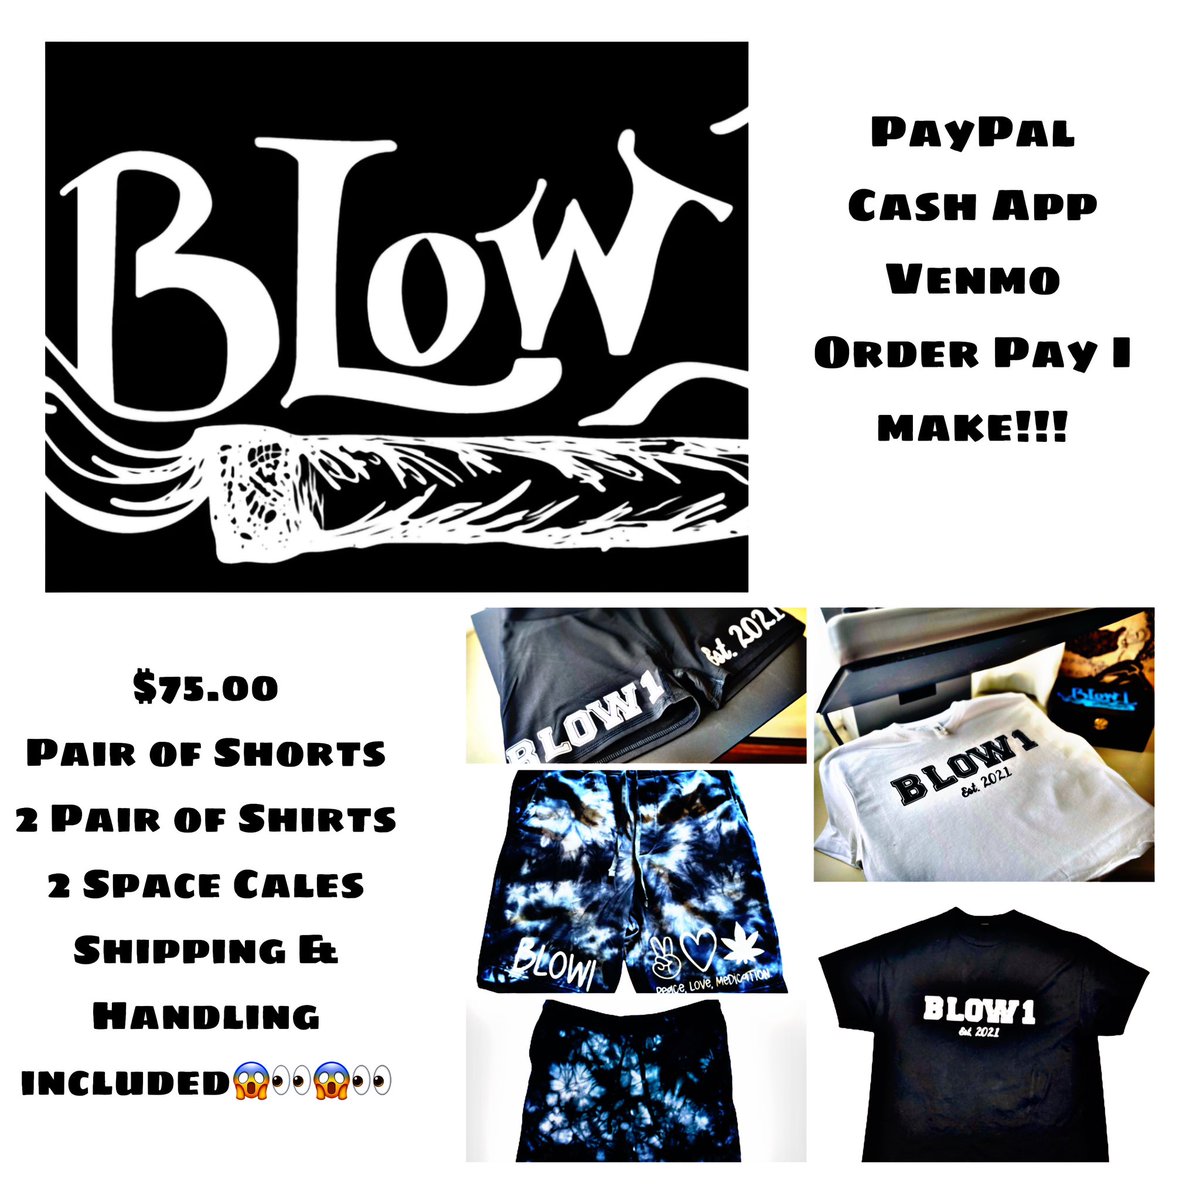 #Blow1Clothing
Don’t MISS OUT
#Blow1Deal 
Still Popping
DM Me ONLY WHEN READY TO PAY!

I don’t want to hear or know what  anyone wants unless u prepared to PAY!
Venmo
Cash App
Pay Pal